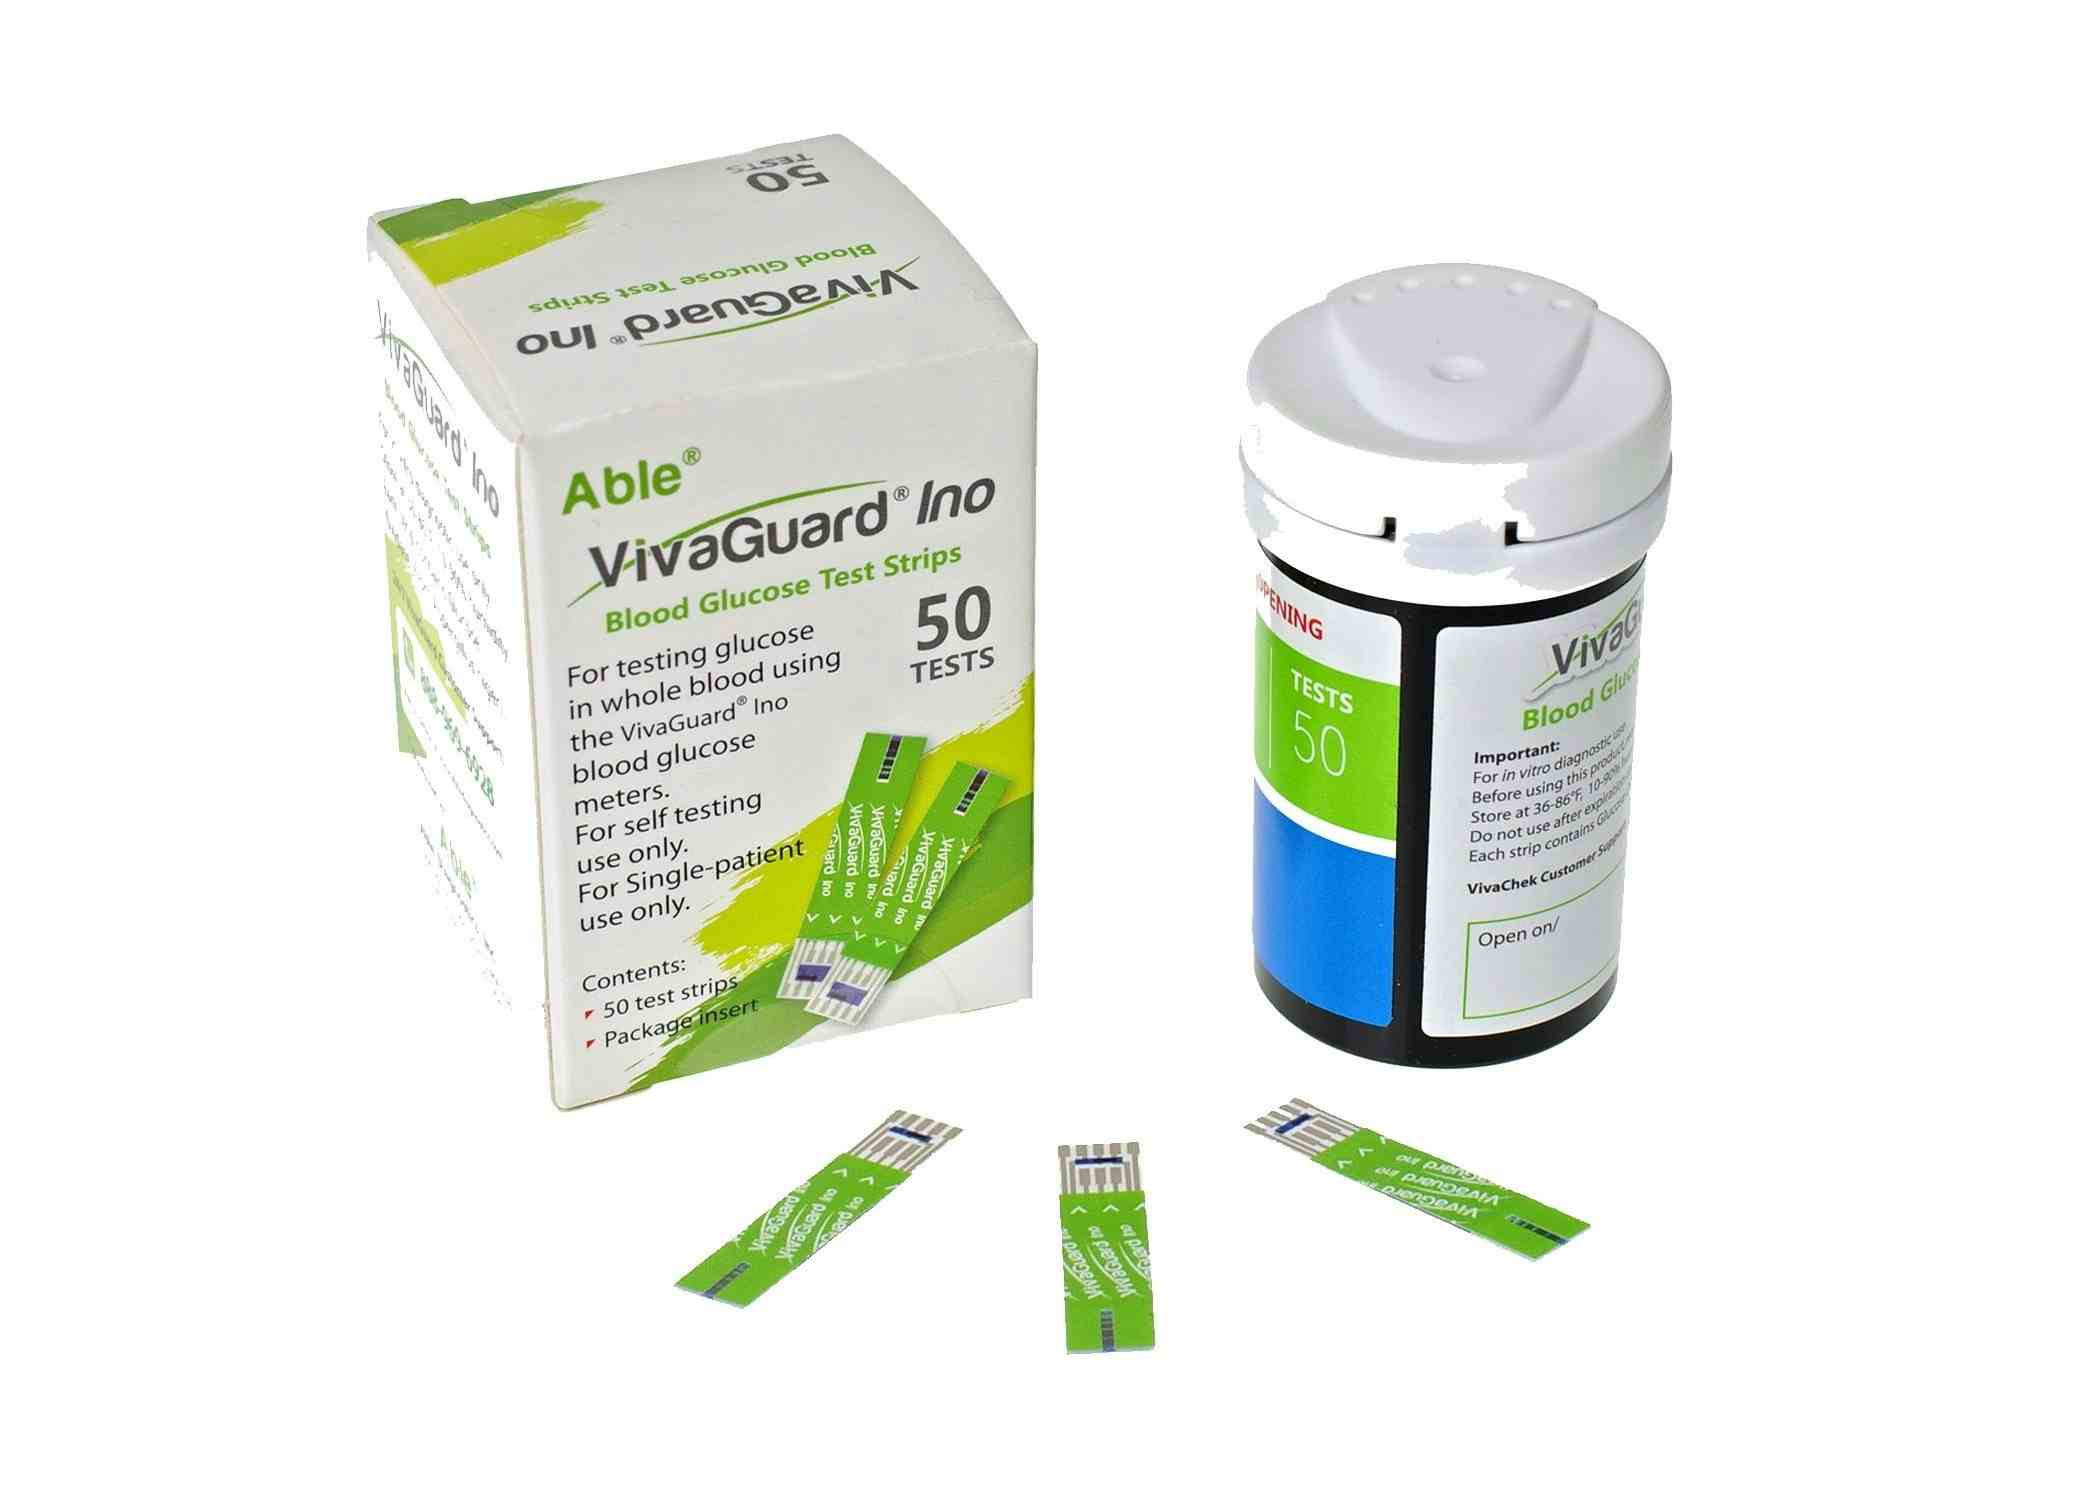 Able VivaGuard Ino Blood Glucose Test Strips, VGS01-378, Box of 50